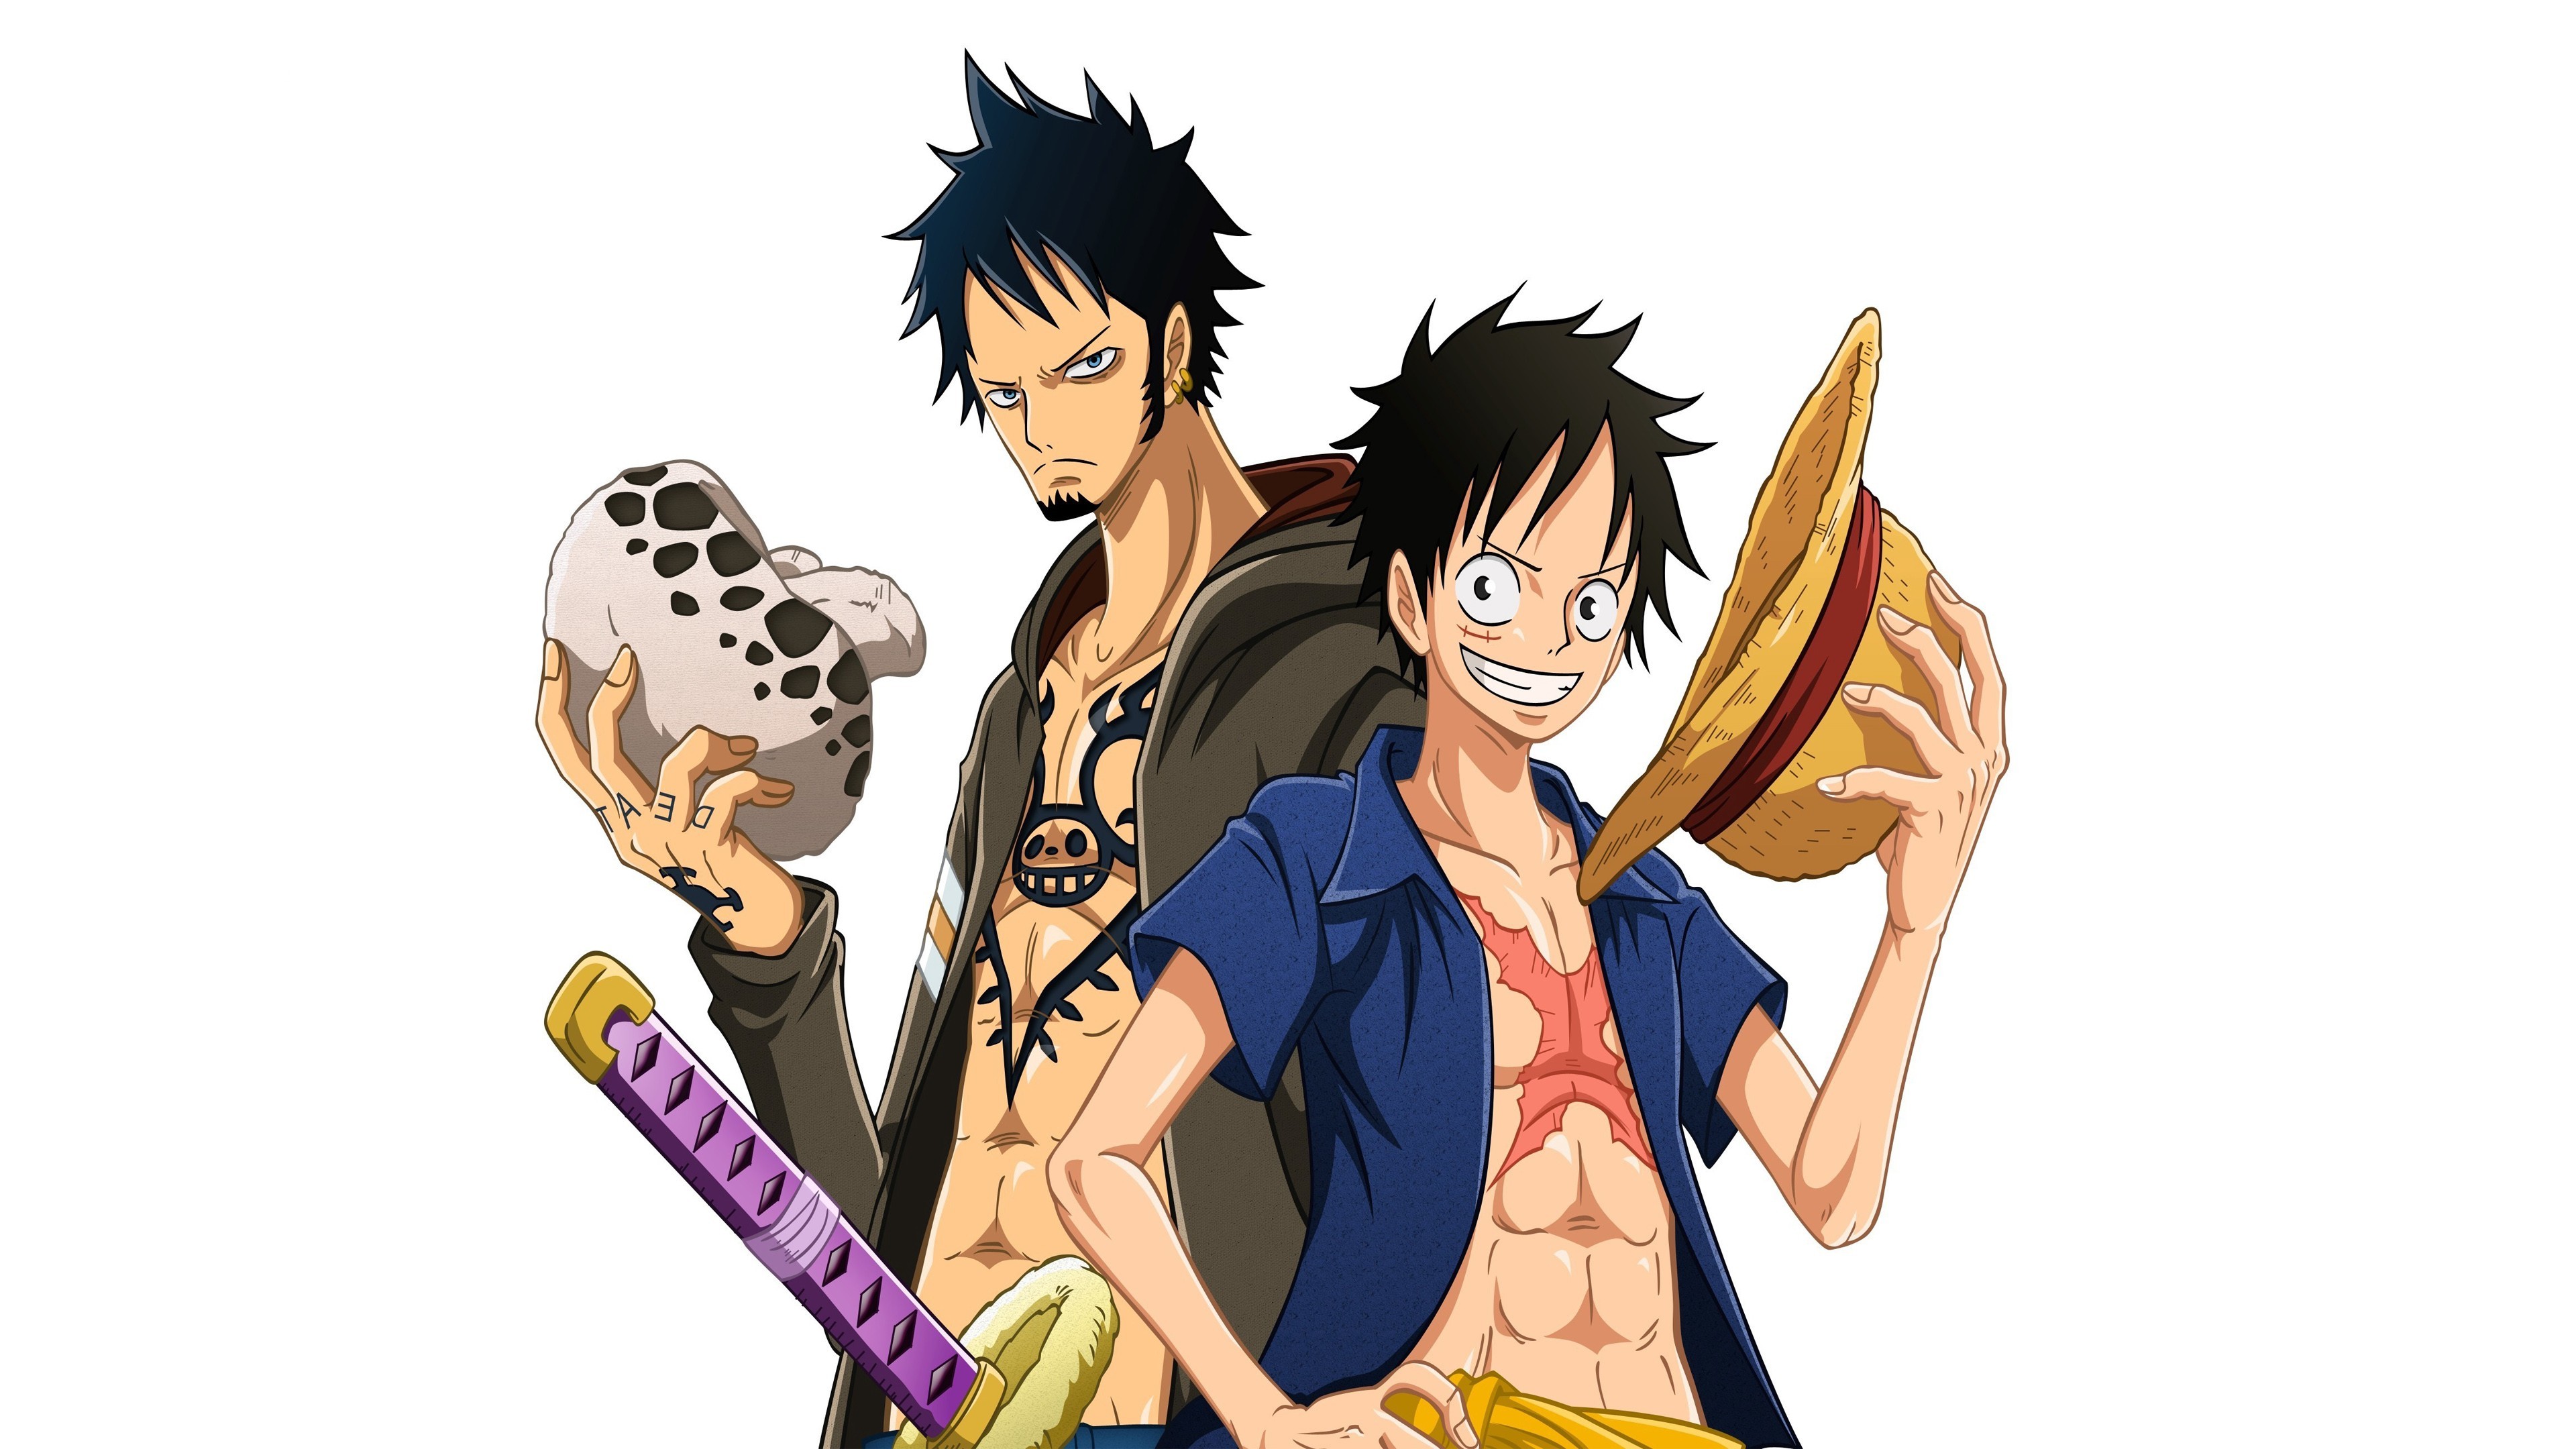 one piece 1541973525 - One Piece - one piece wallpapers, anime wallpapers